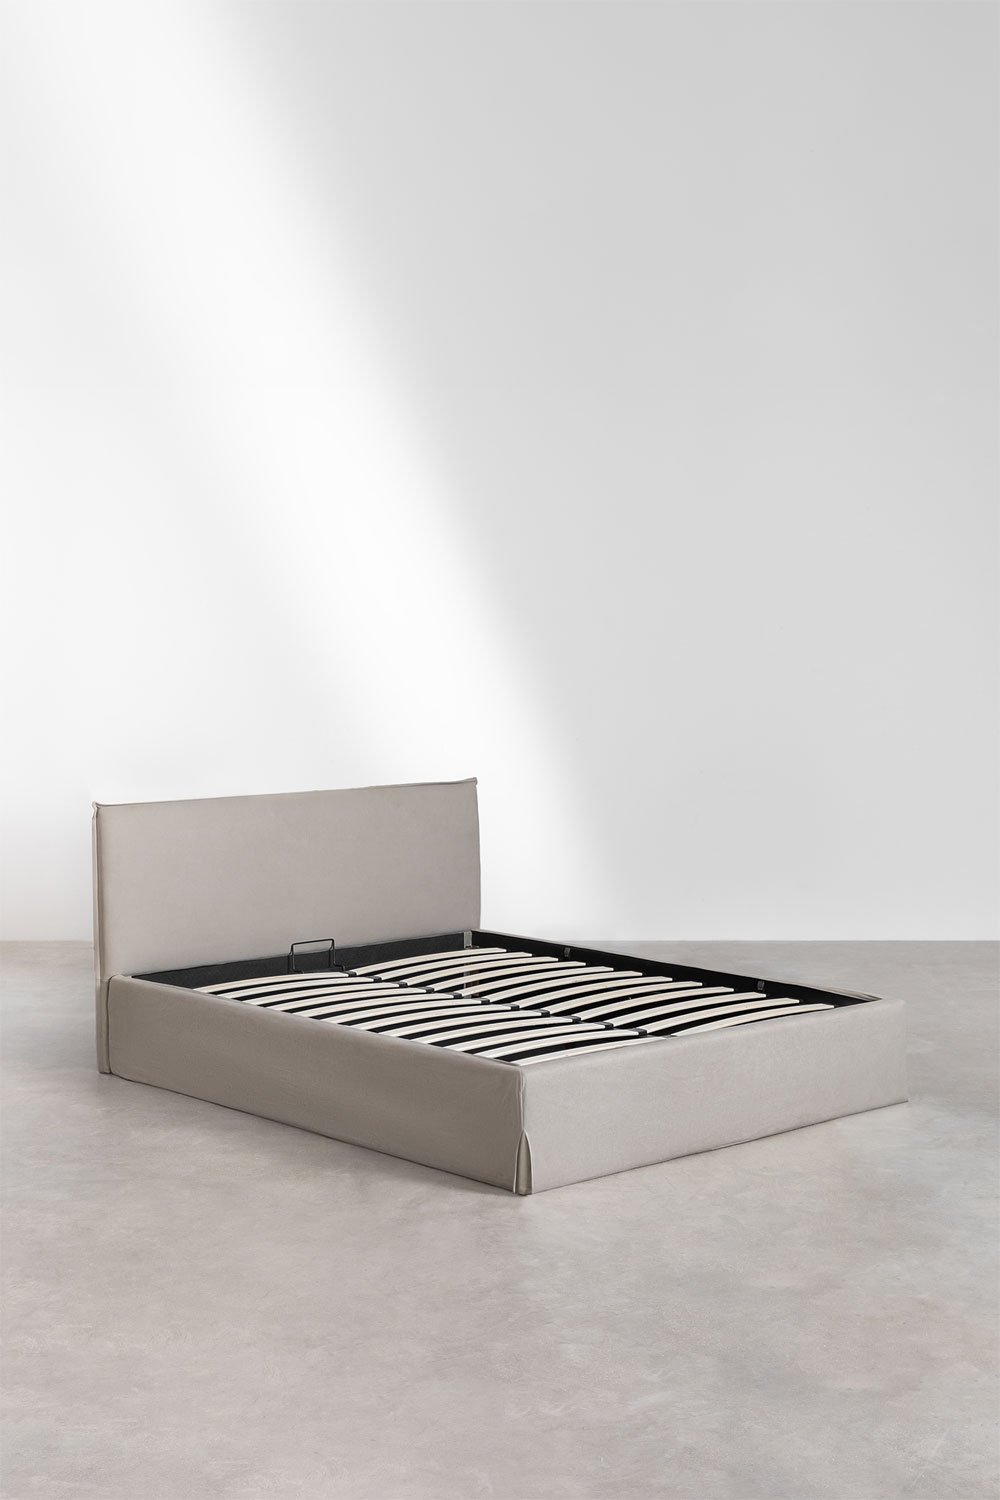 Lorea bed with foldable canape, gallery image 1